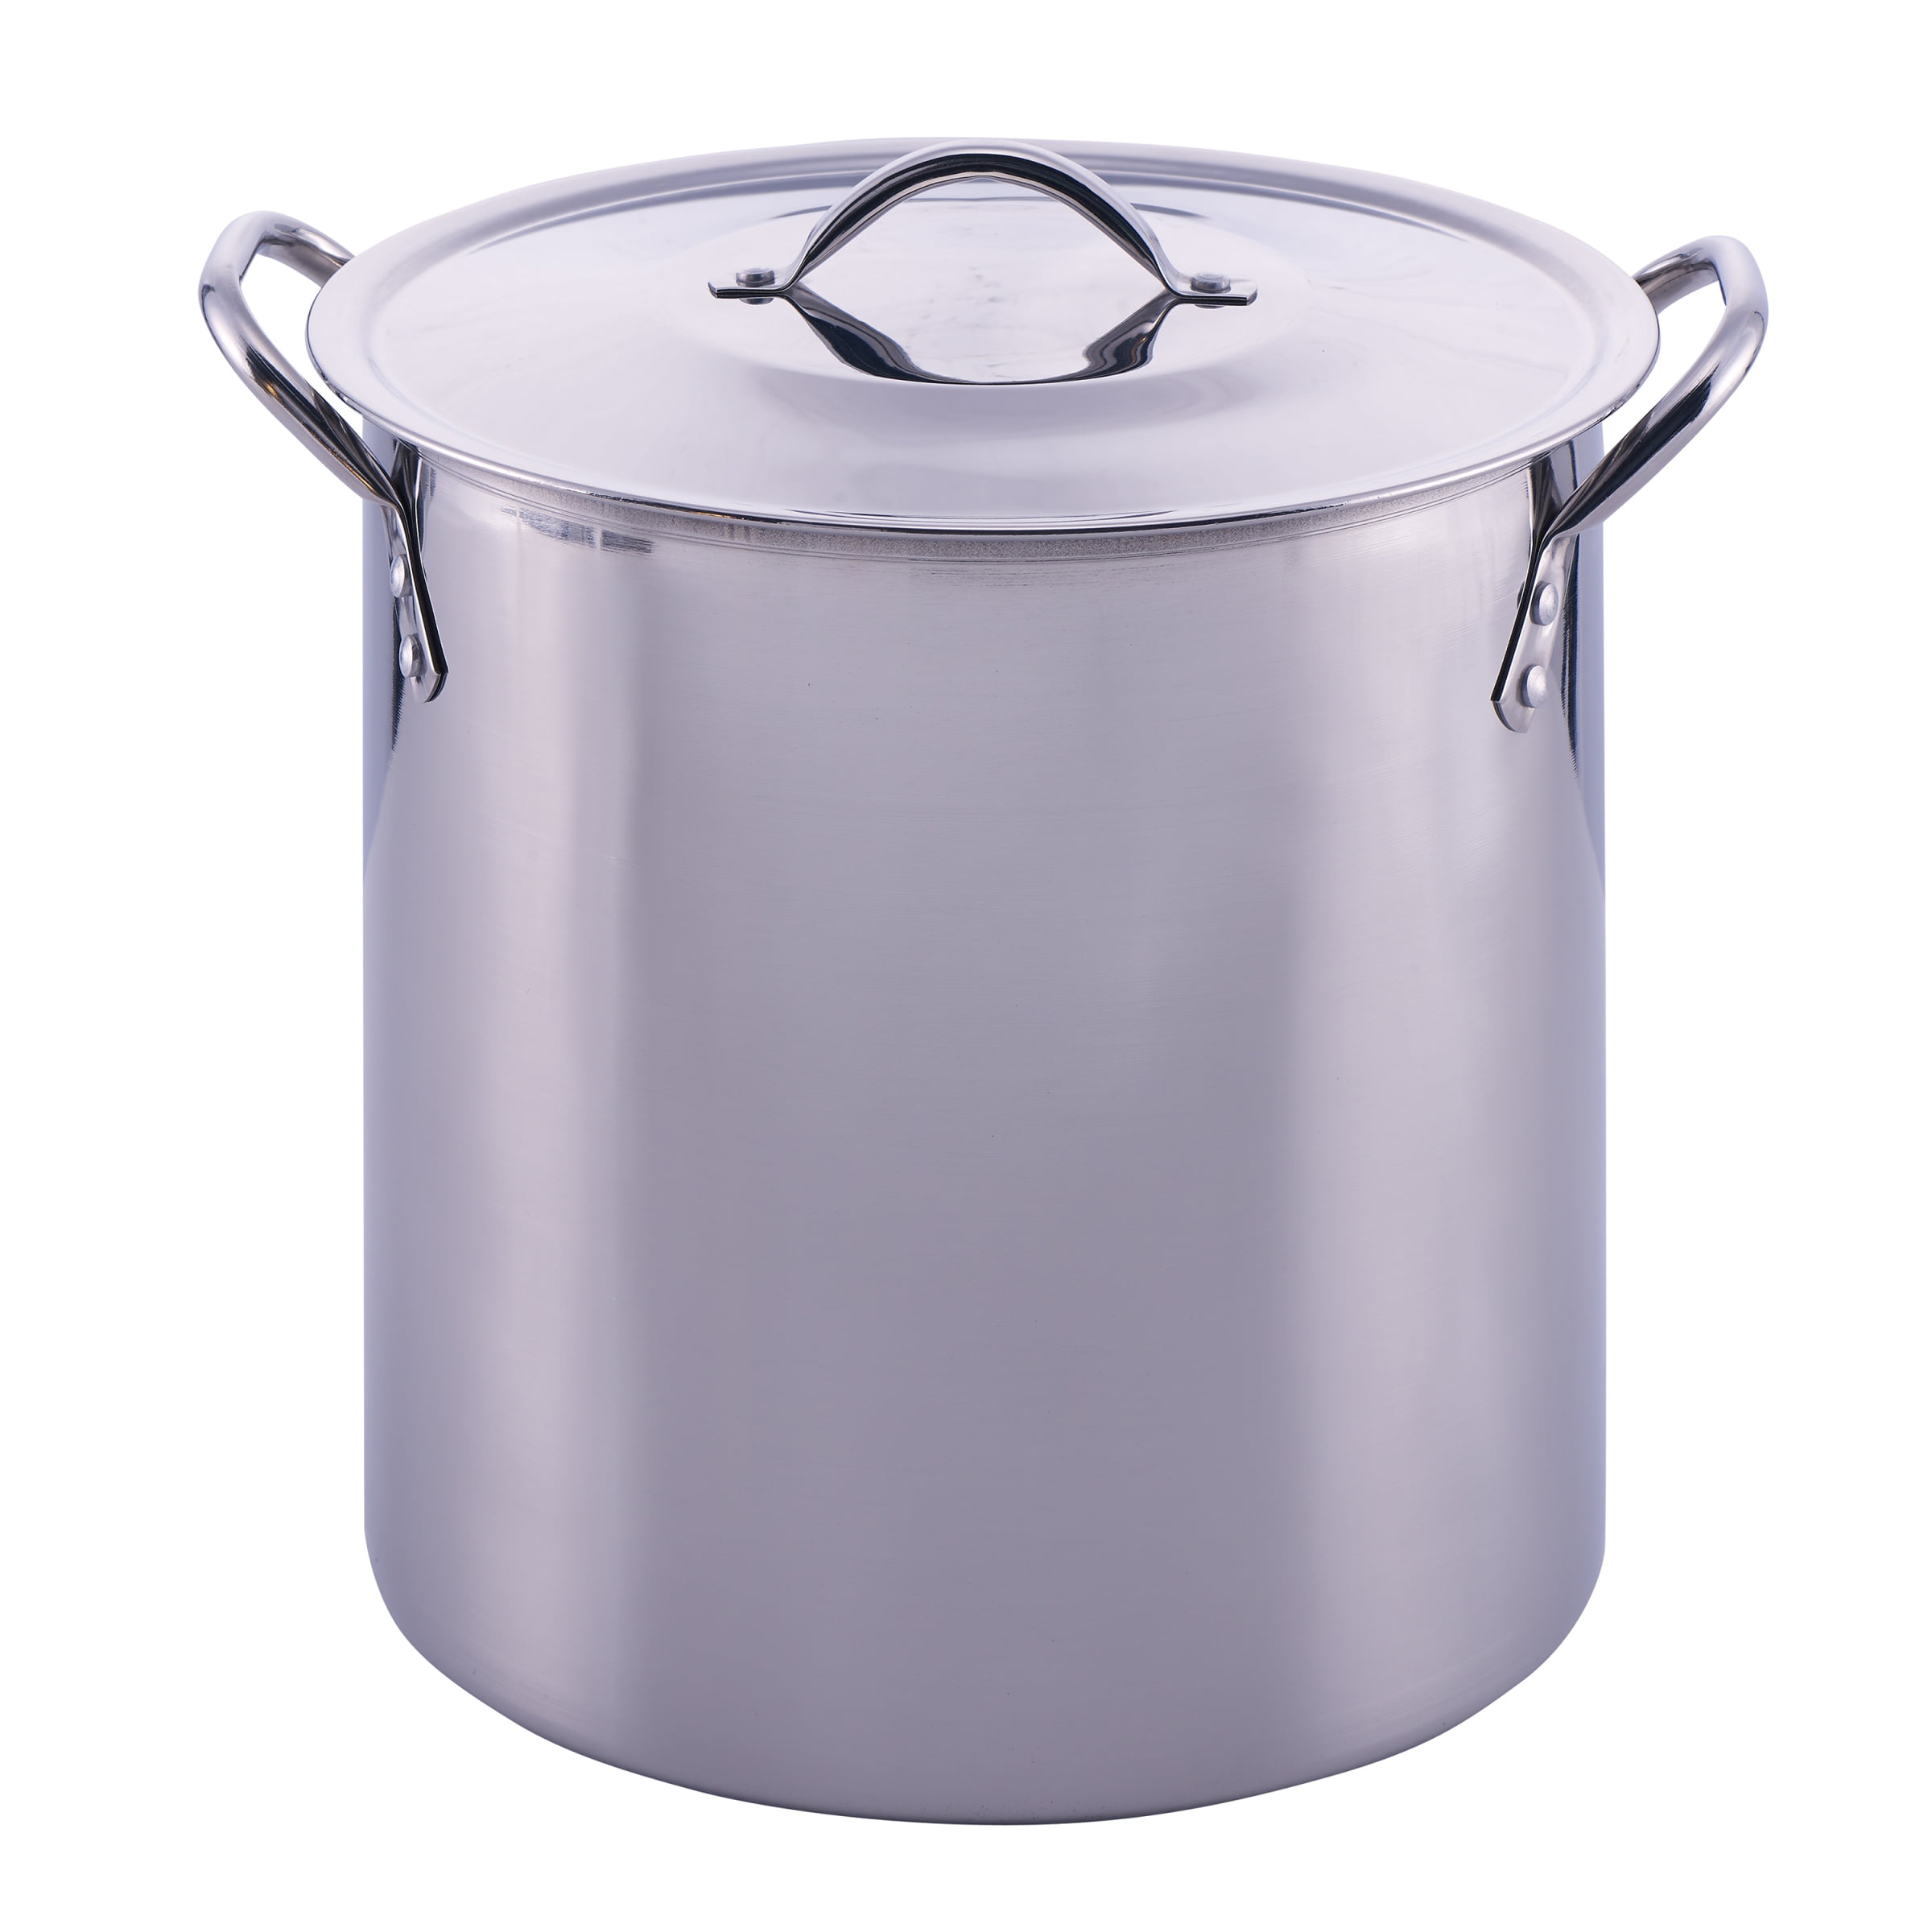 Big stainless steel cooking pots